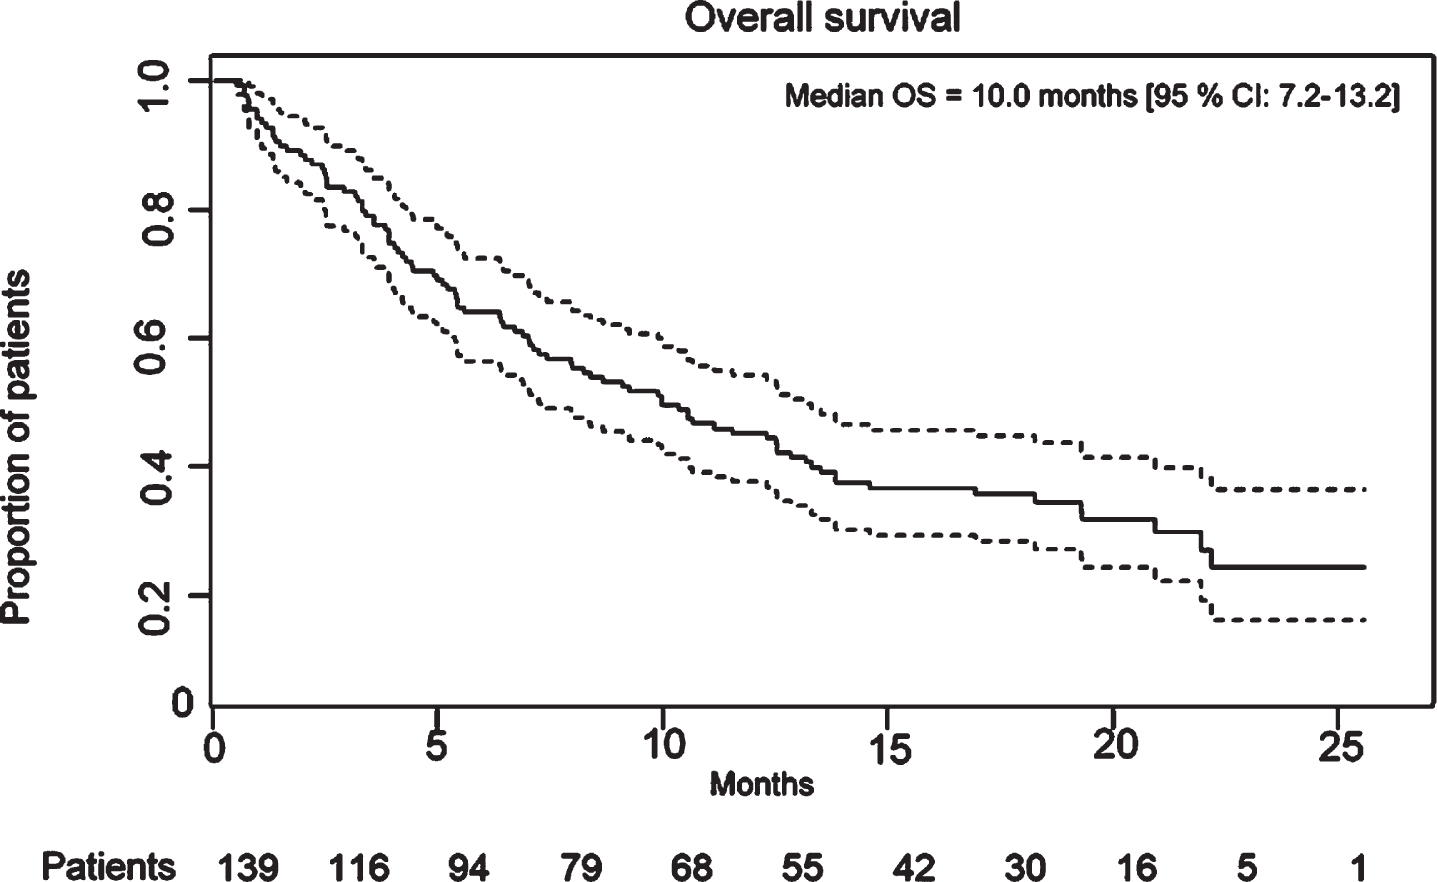 Overall survival for all treatment lines combined.